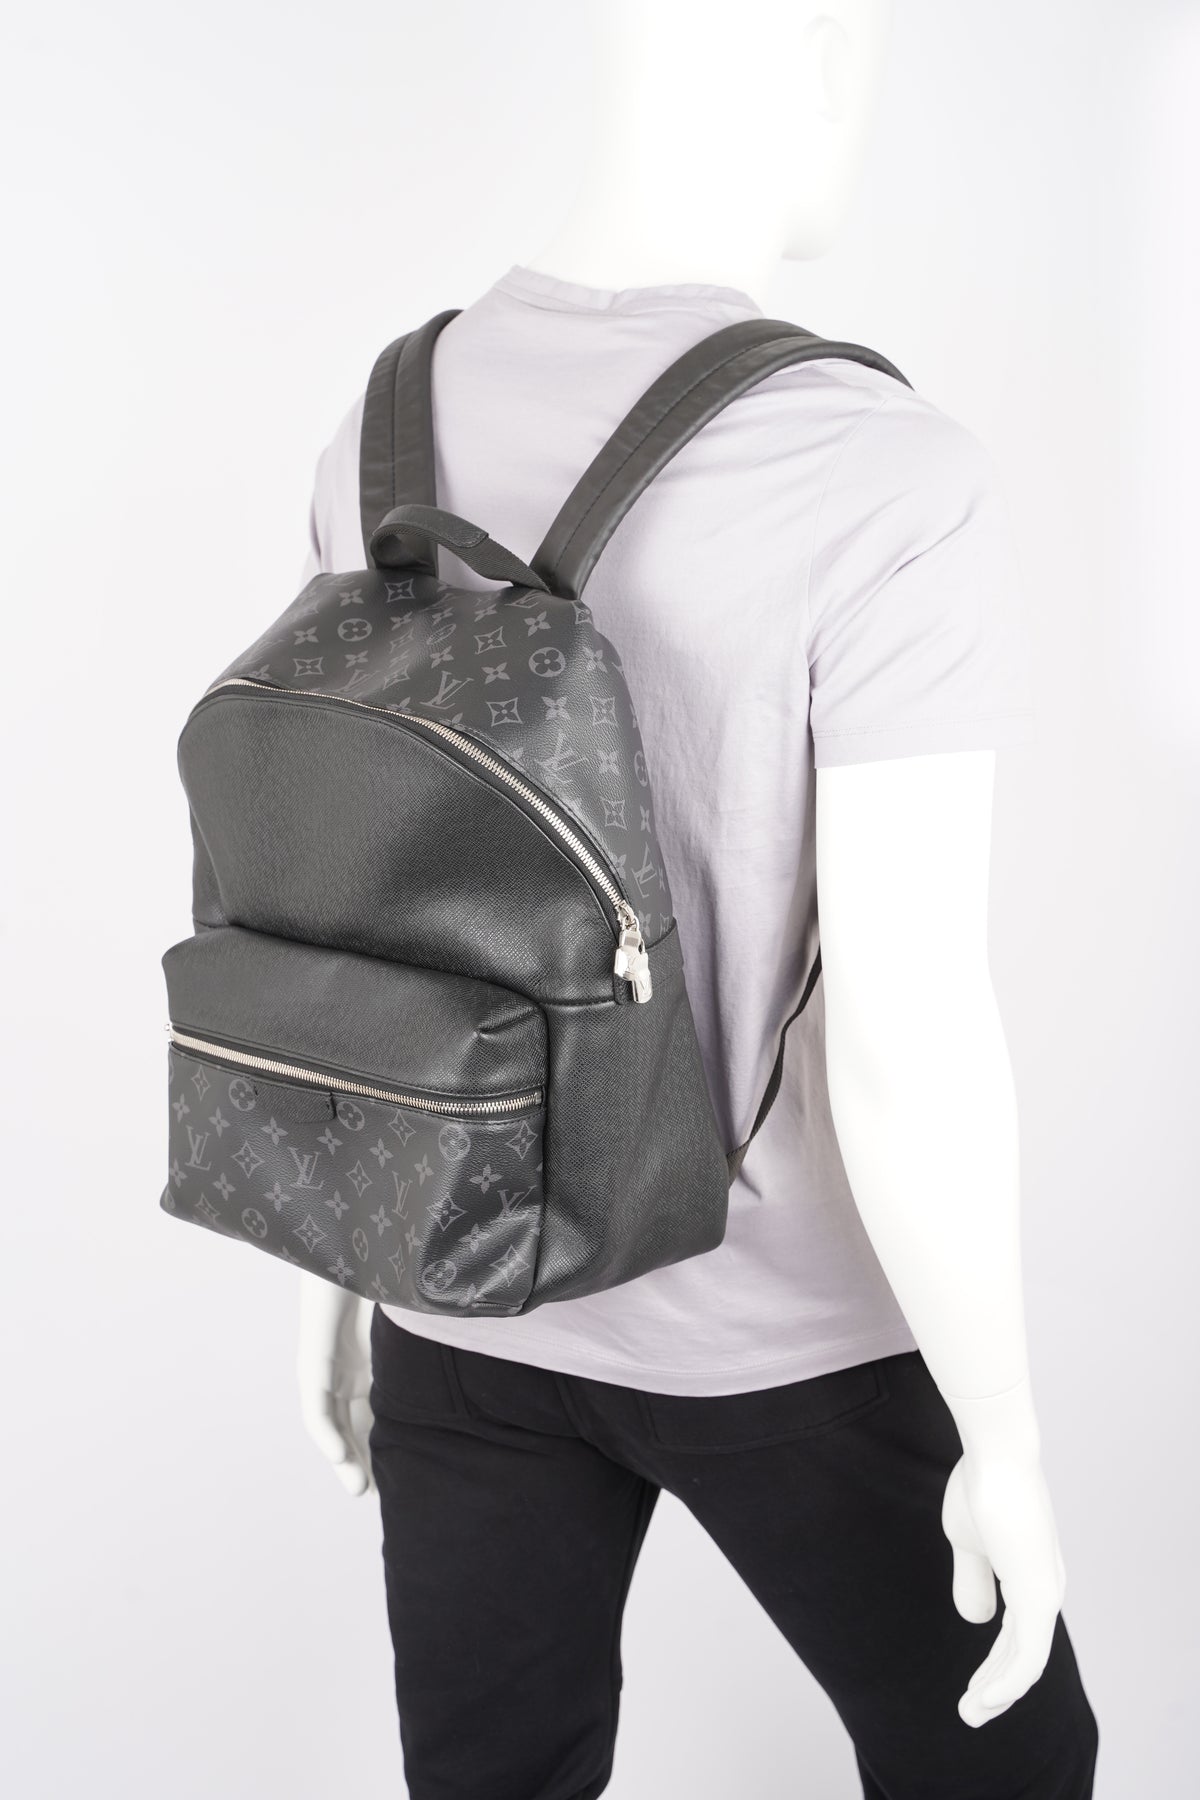 Discovery Backpack PM Monogram Eclipse - Men - Bags